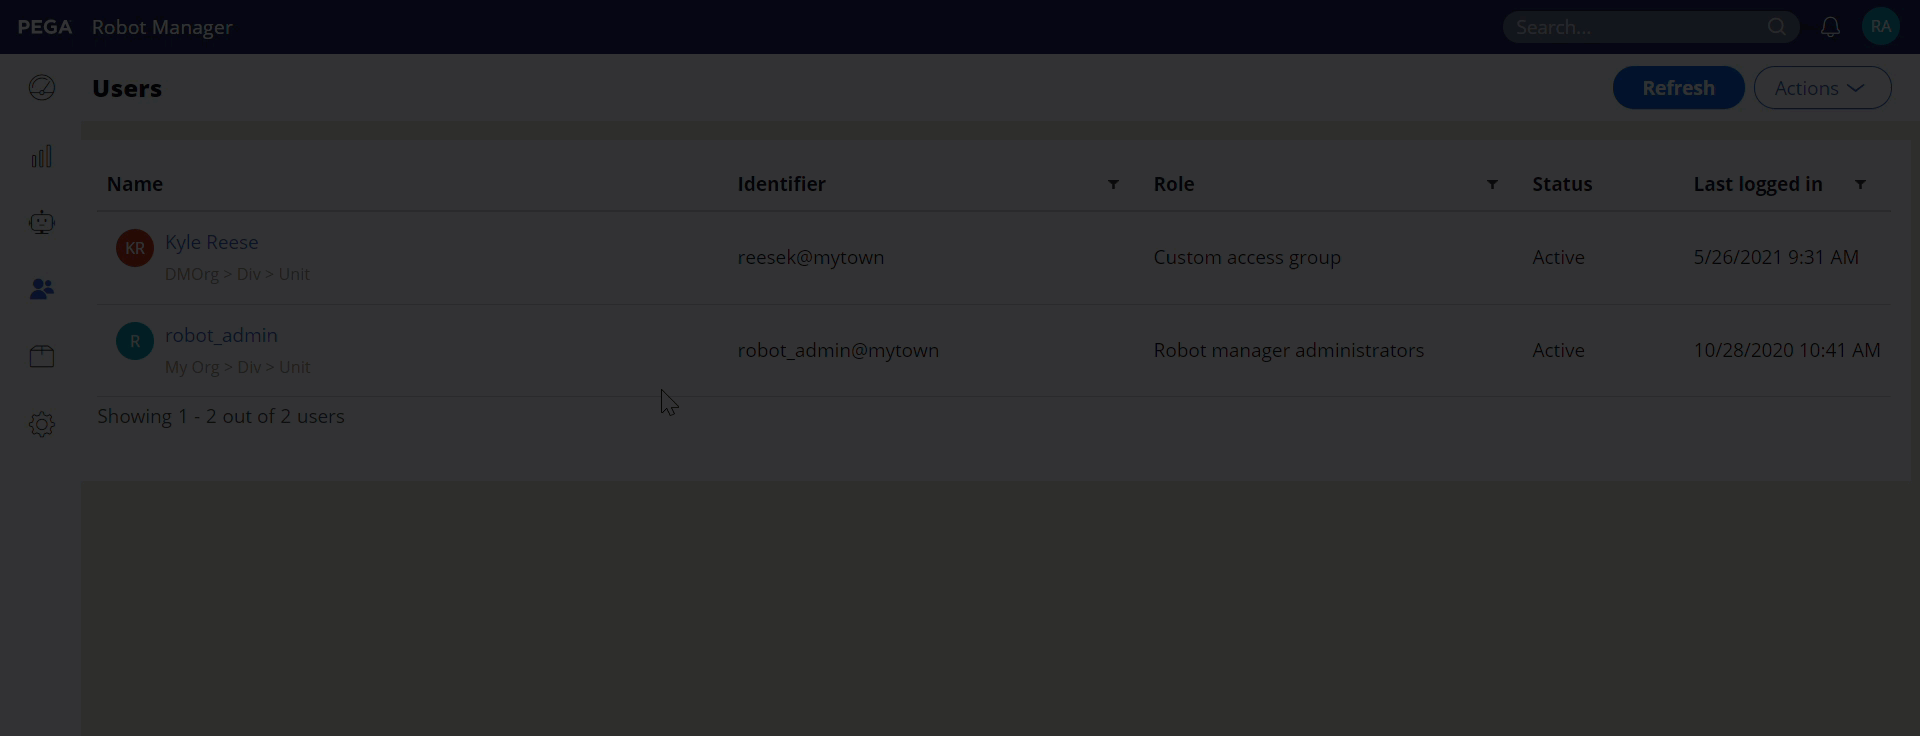 You can modify existing user settings on the Users landing
                                page